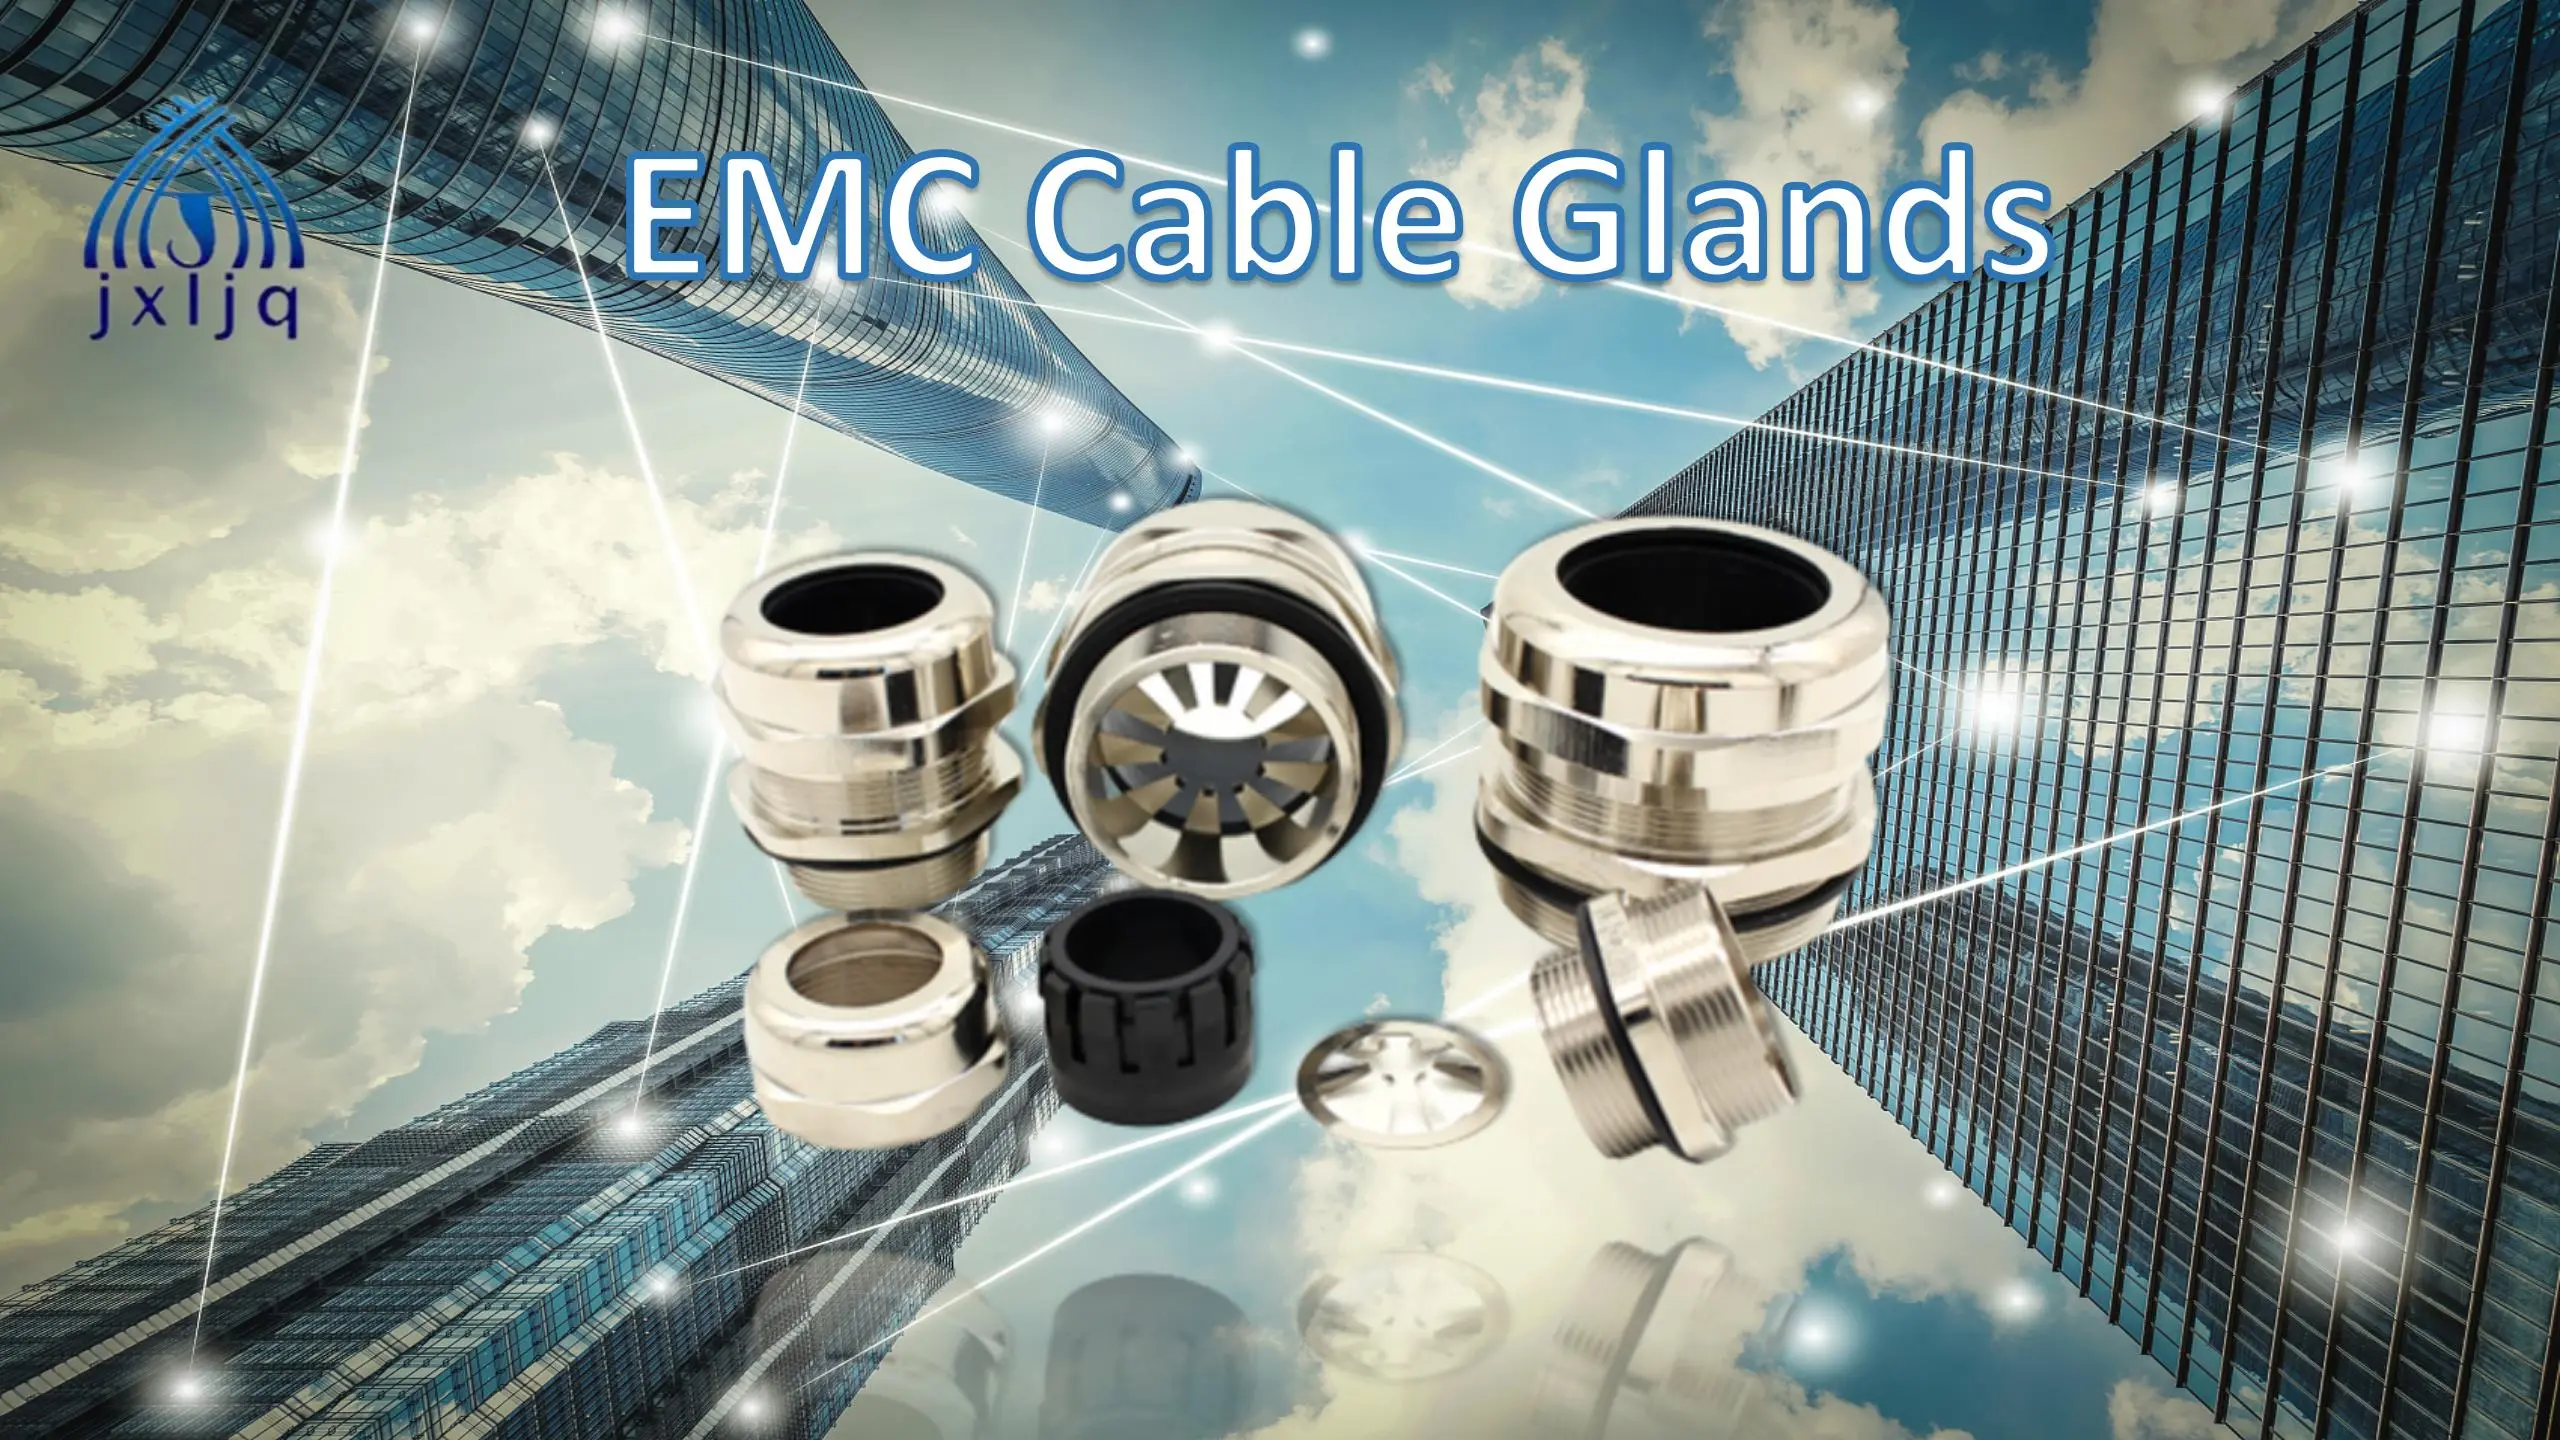 Why EMC cable glands so important?